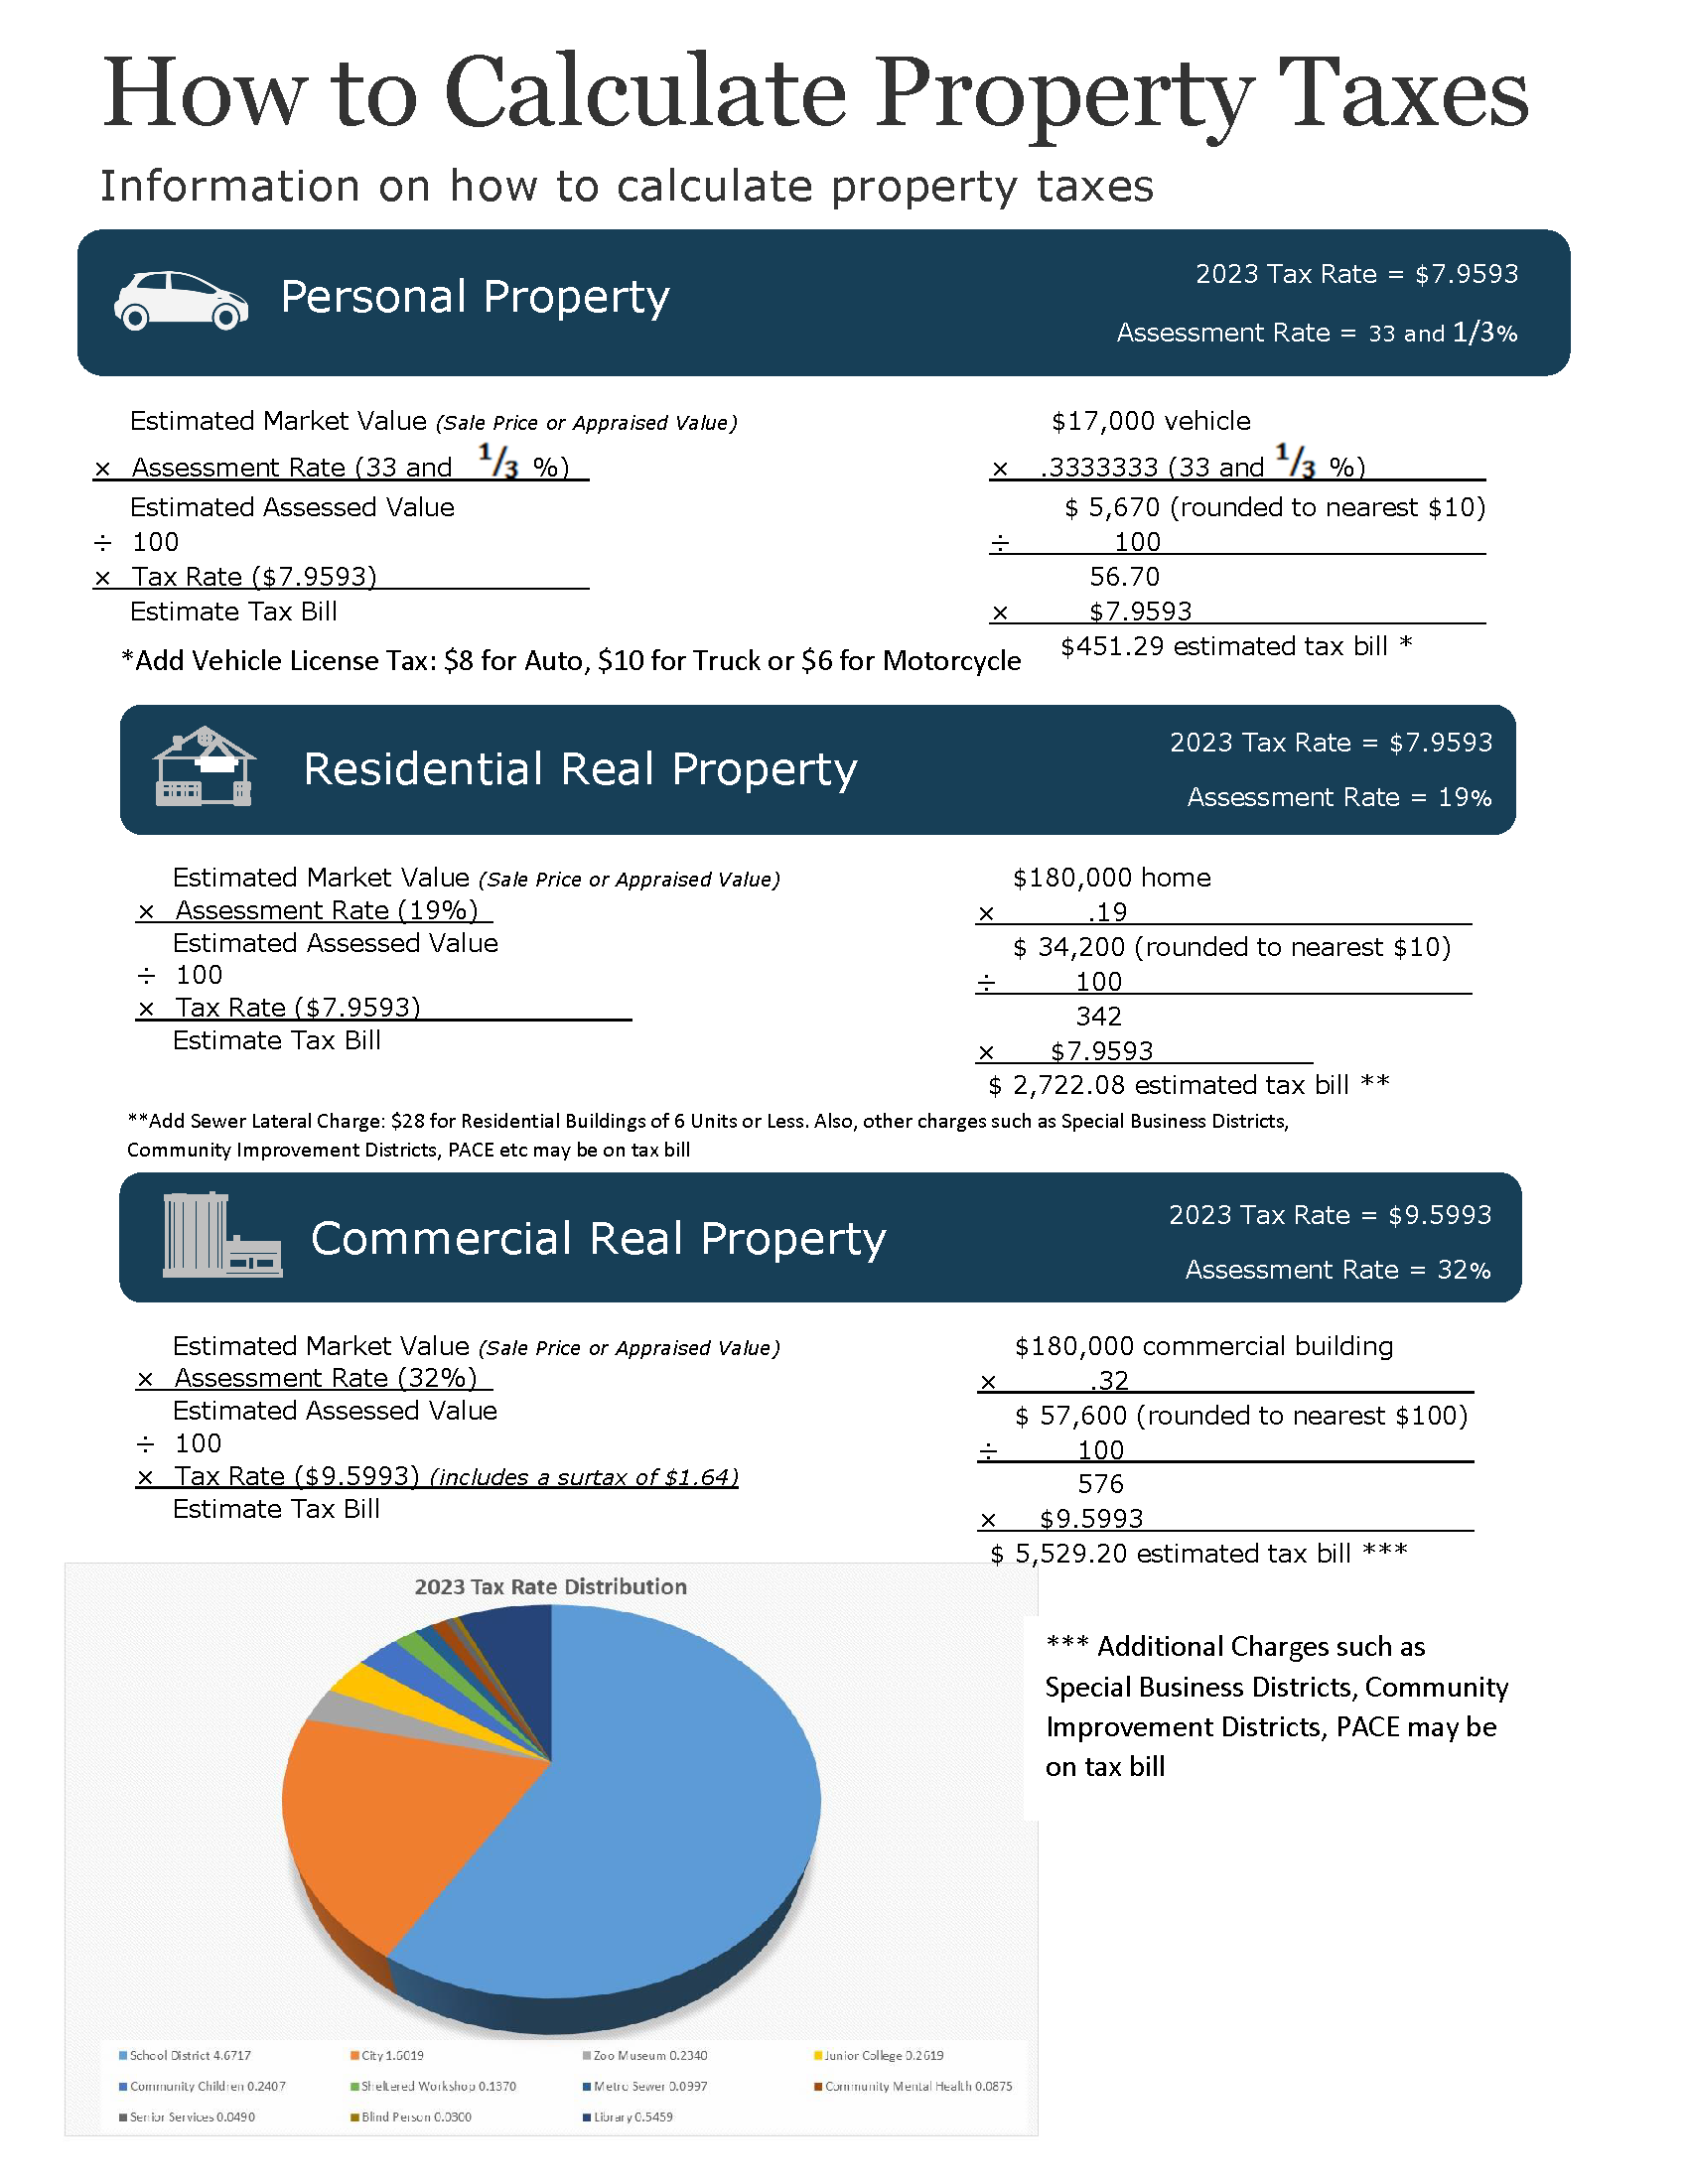 How To Calculate Property Taxes 2023 